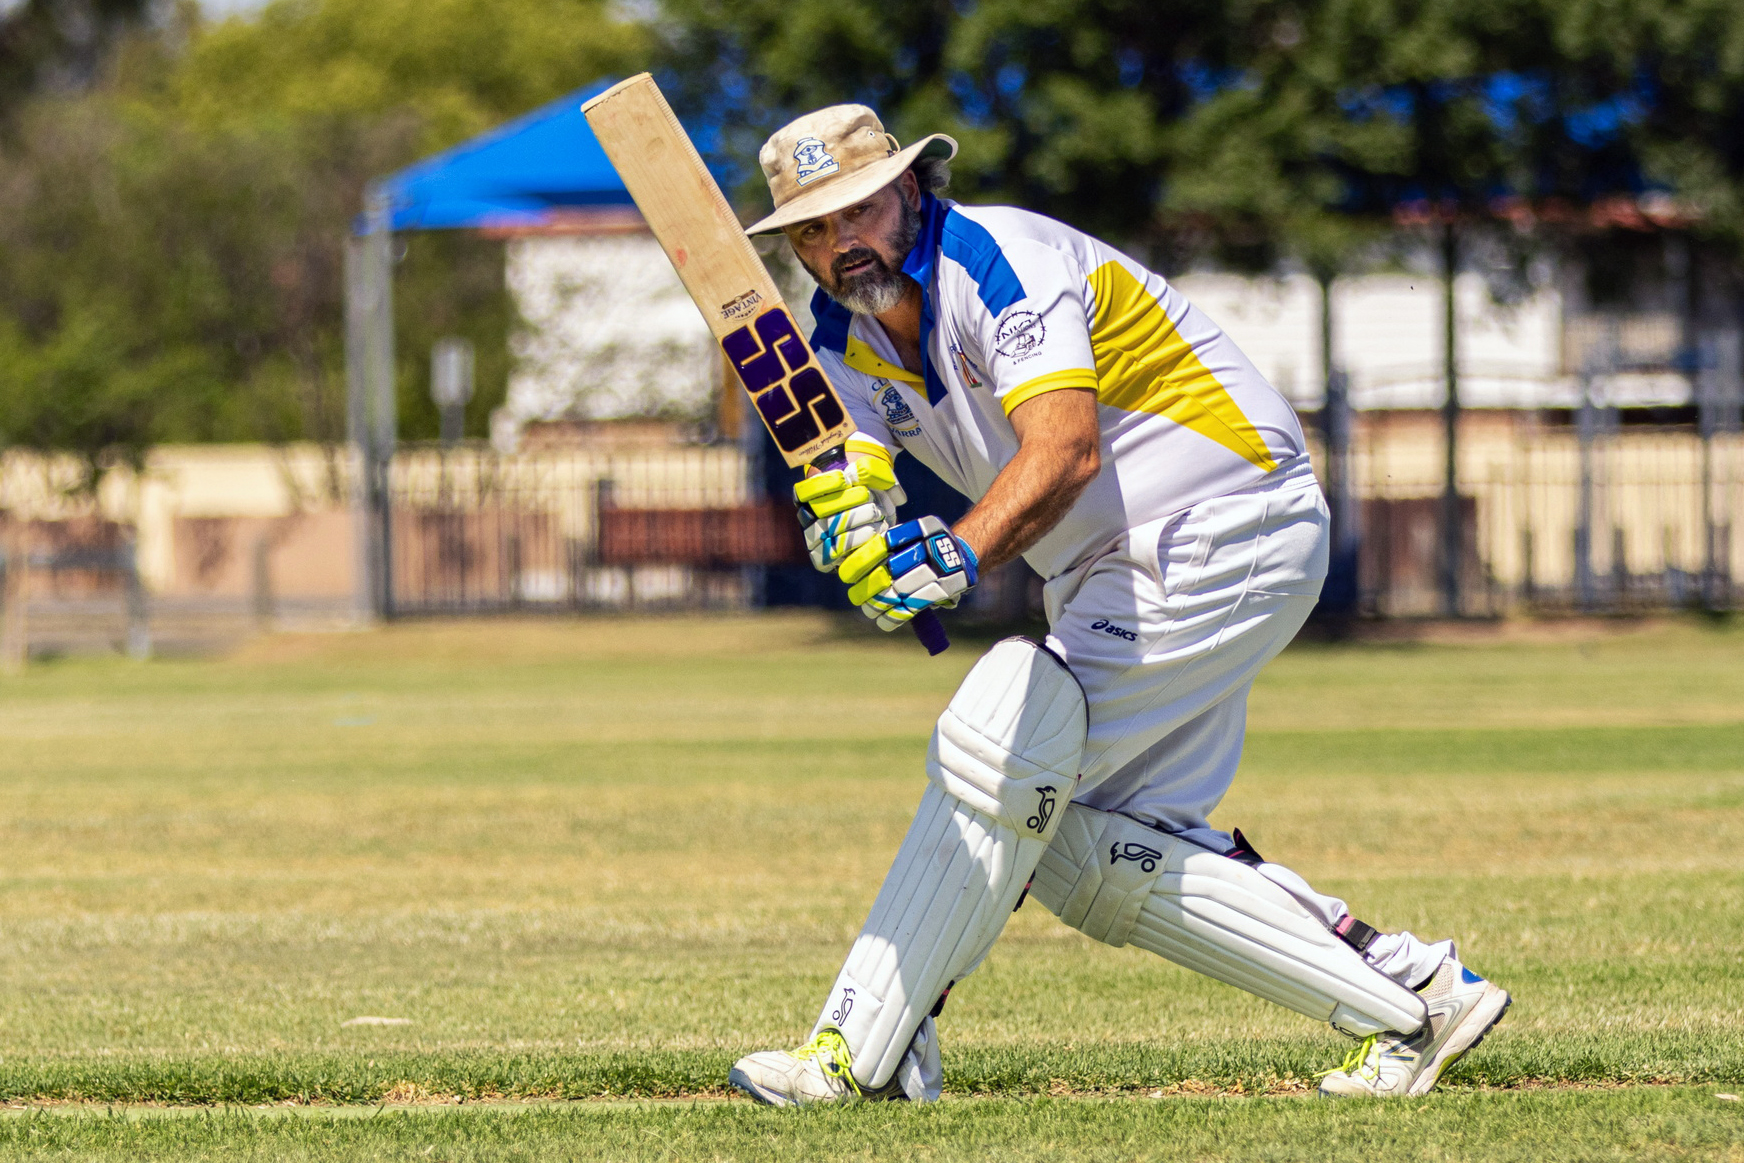 RSL power their way to another NDCA second grade victory to take the outright lead at the top of the ladder